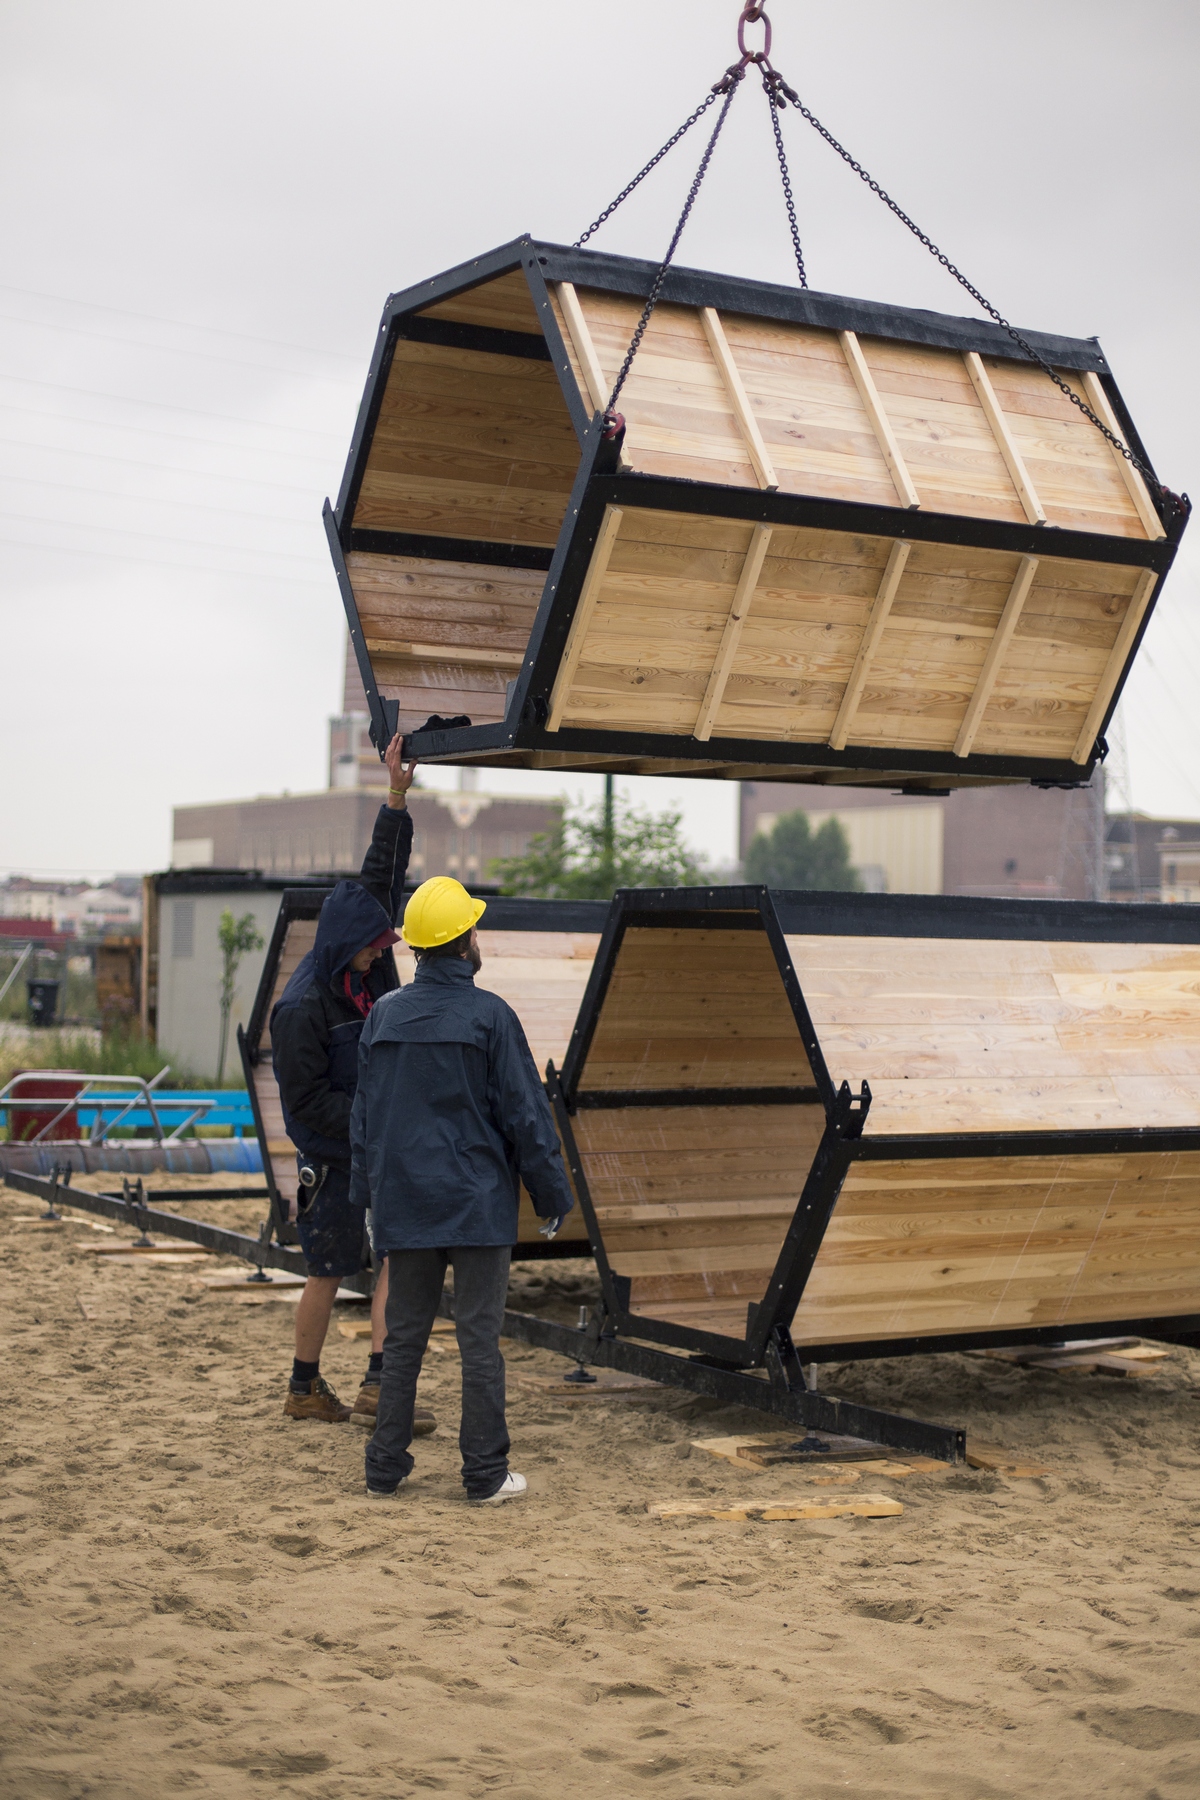 B-and-Bee camping concept proposes stackable sleeping cells for festivals